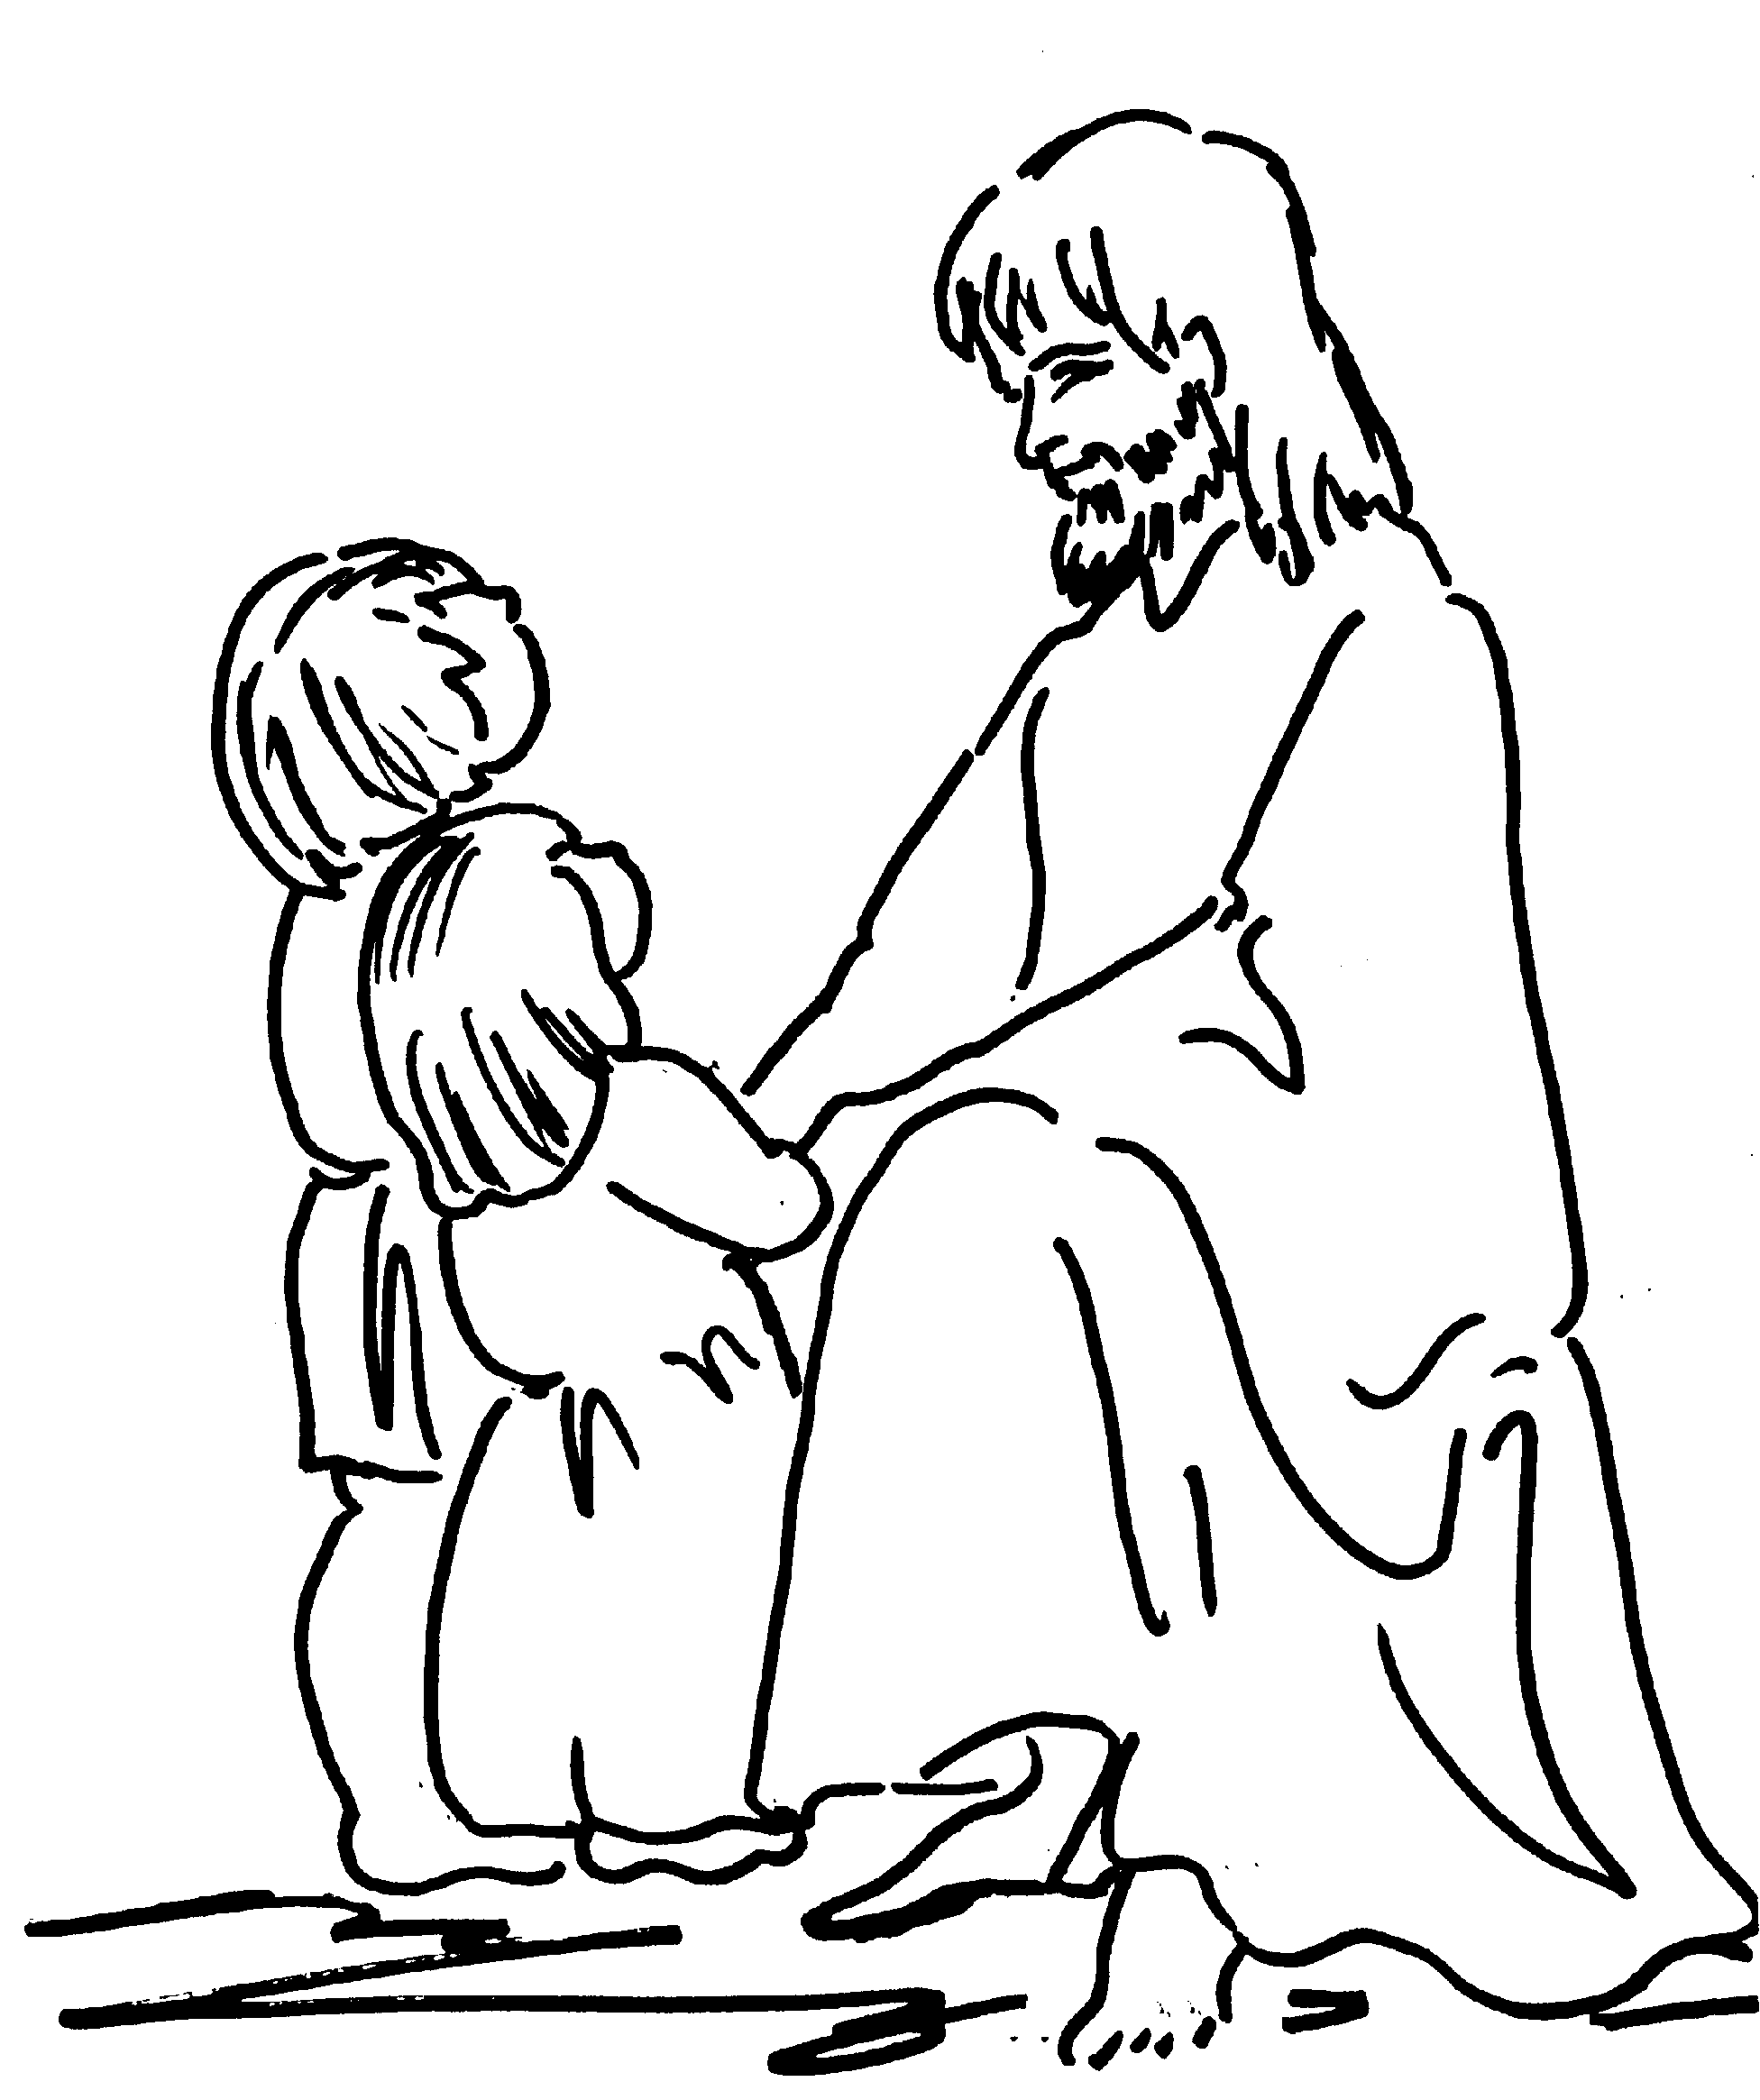 Jesus And Children Black And White Images  Pictures - Becuo